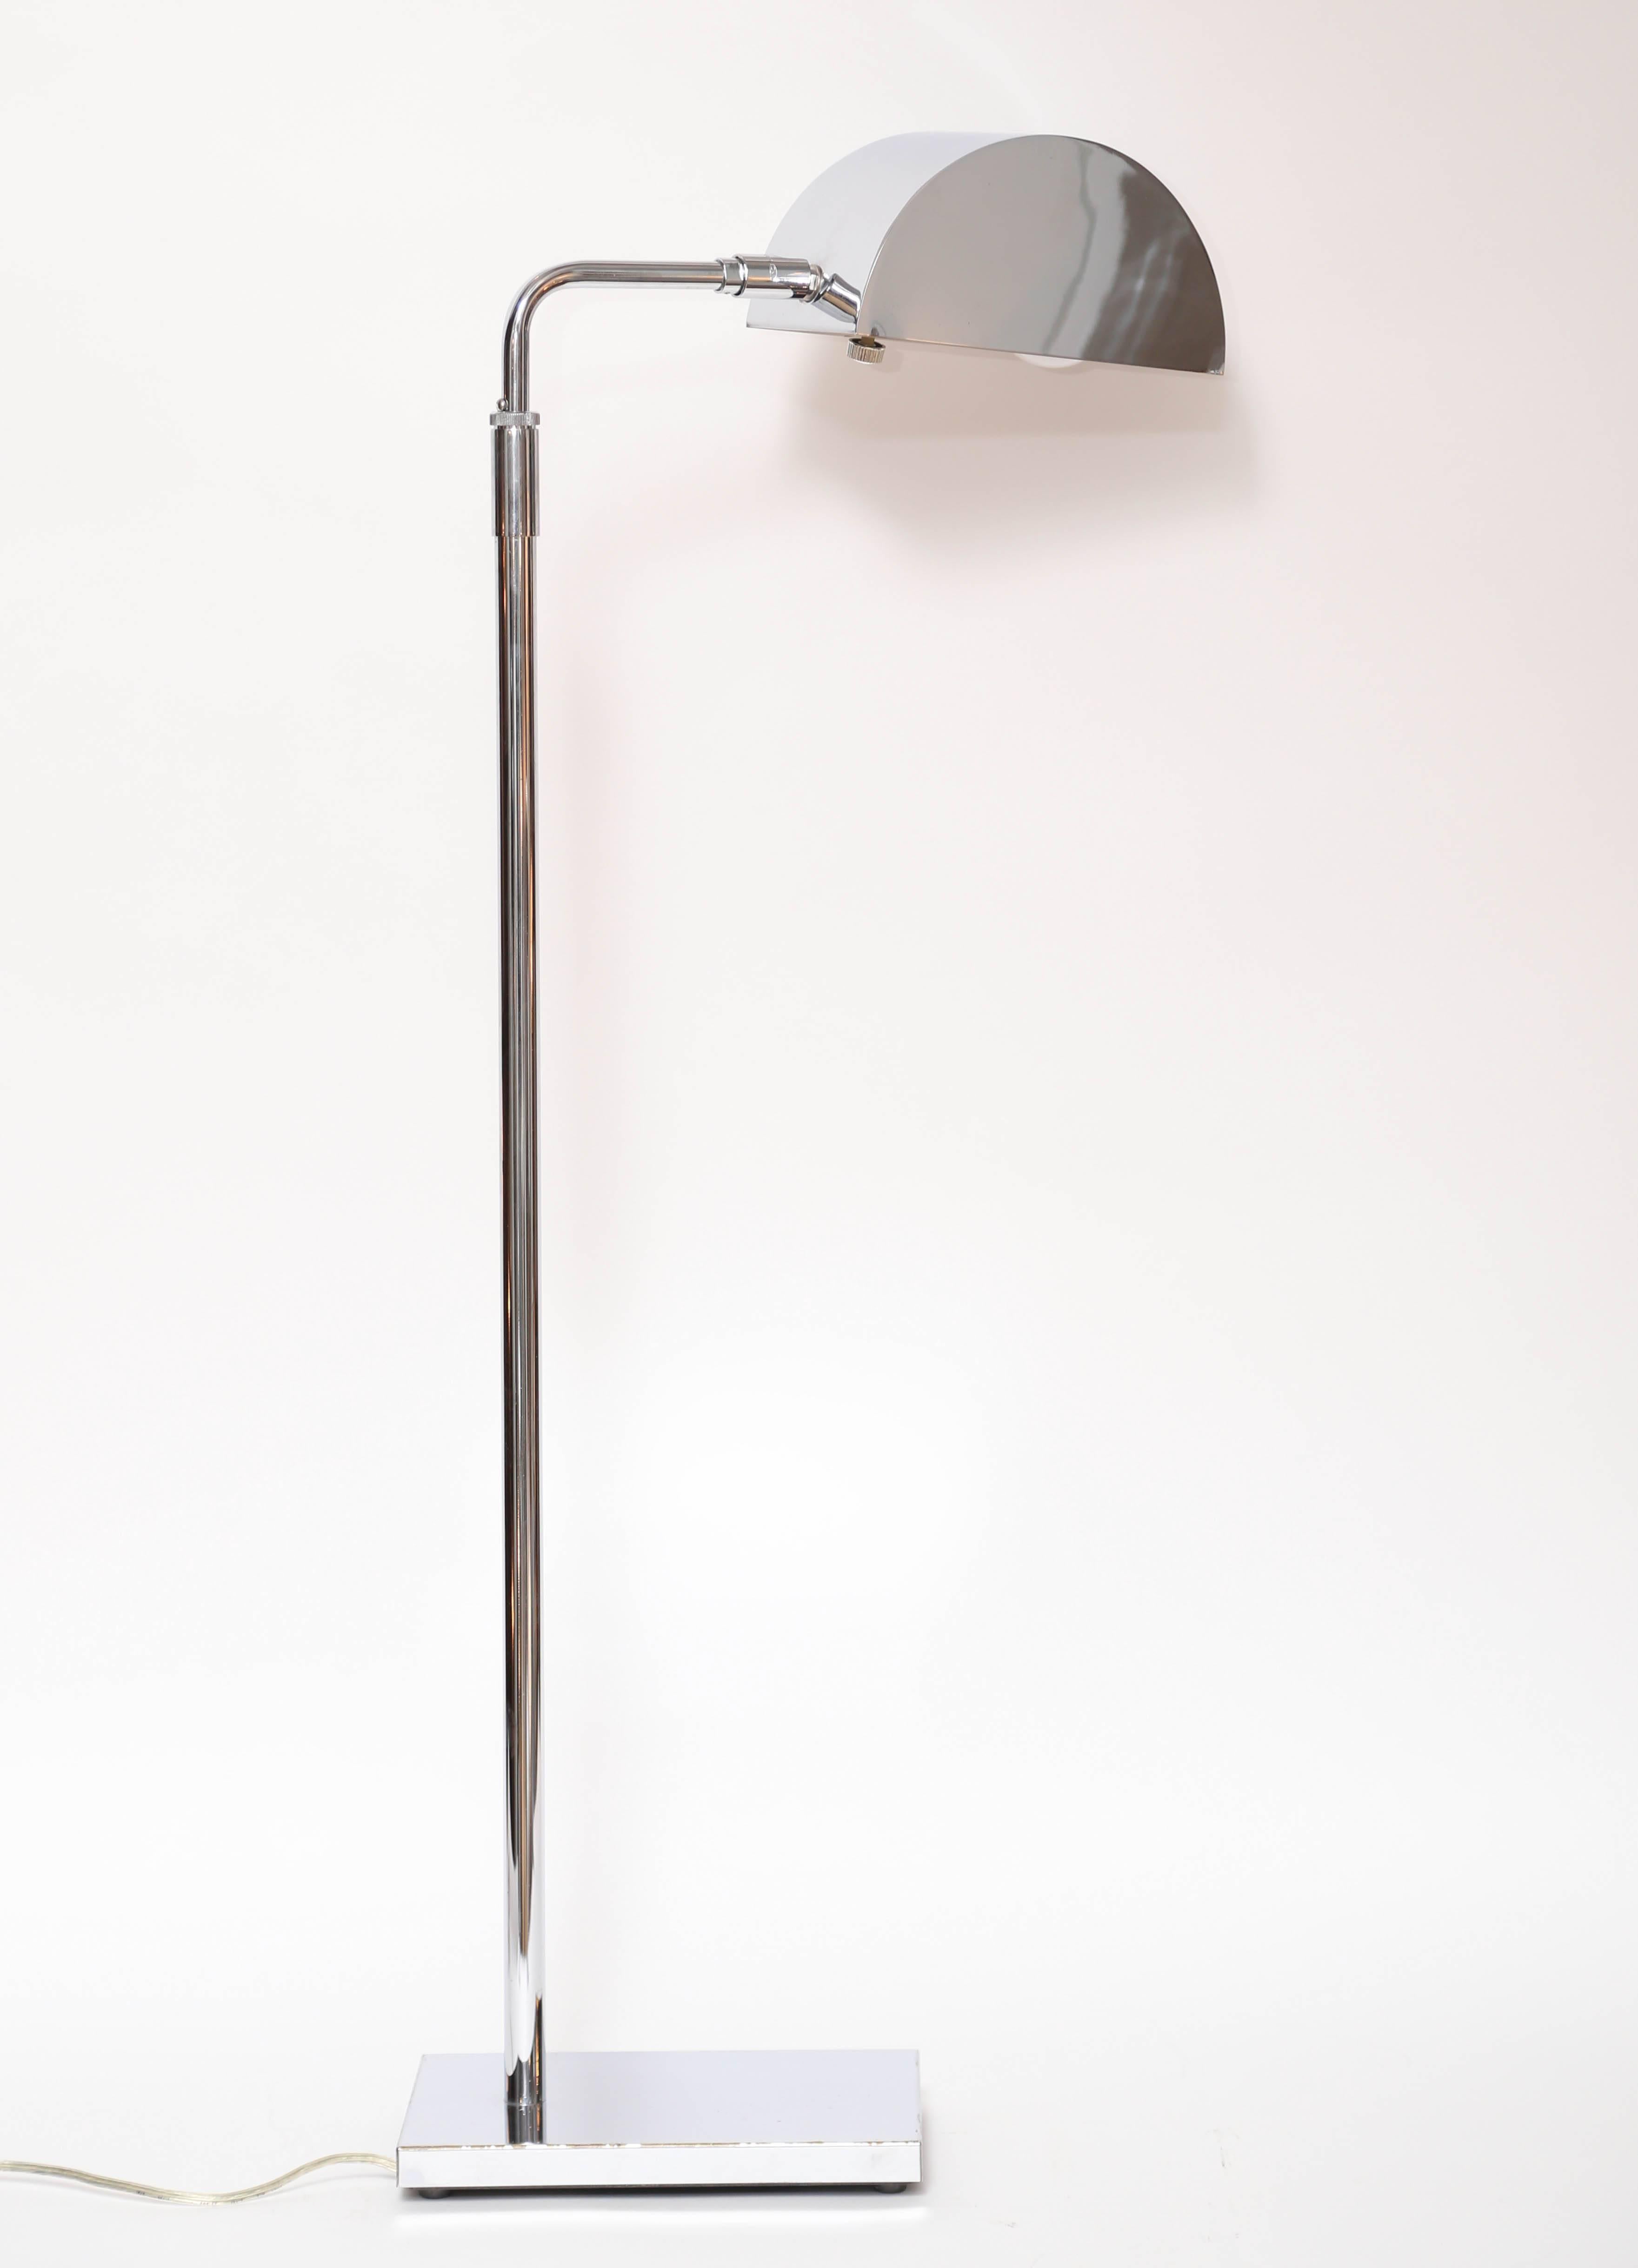 Superb chrome floor lamp by Koch & Lowy, circa 1970s. Adjustable-height steam with slim dome shade that tilts and swivels.
Measures: Base 9.25